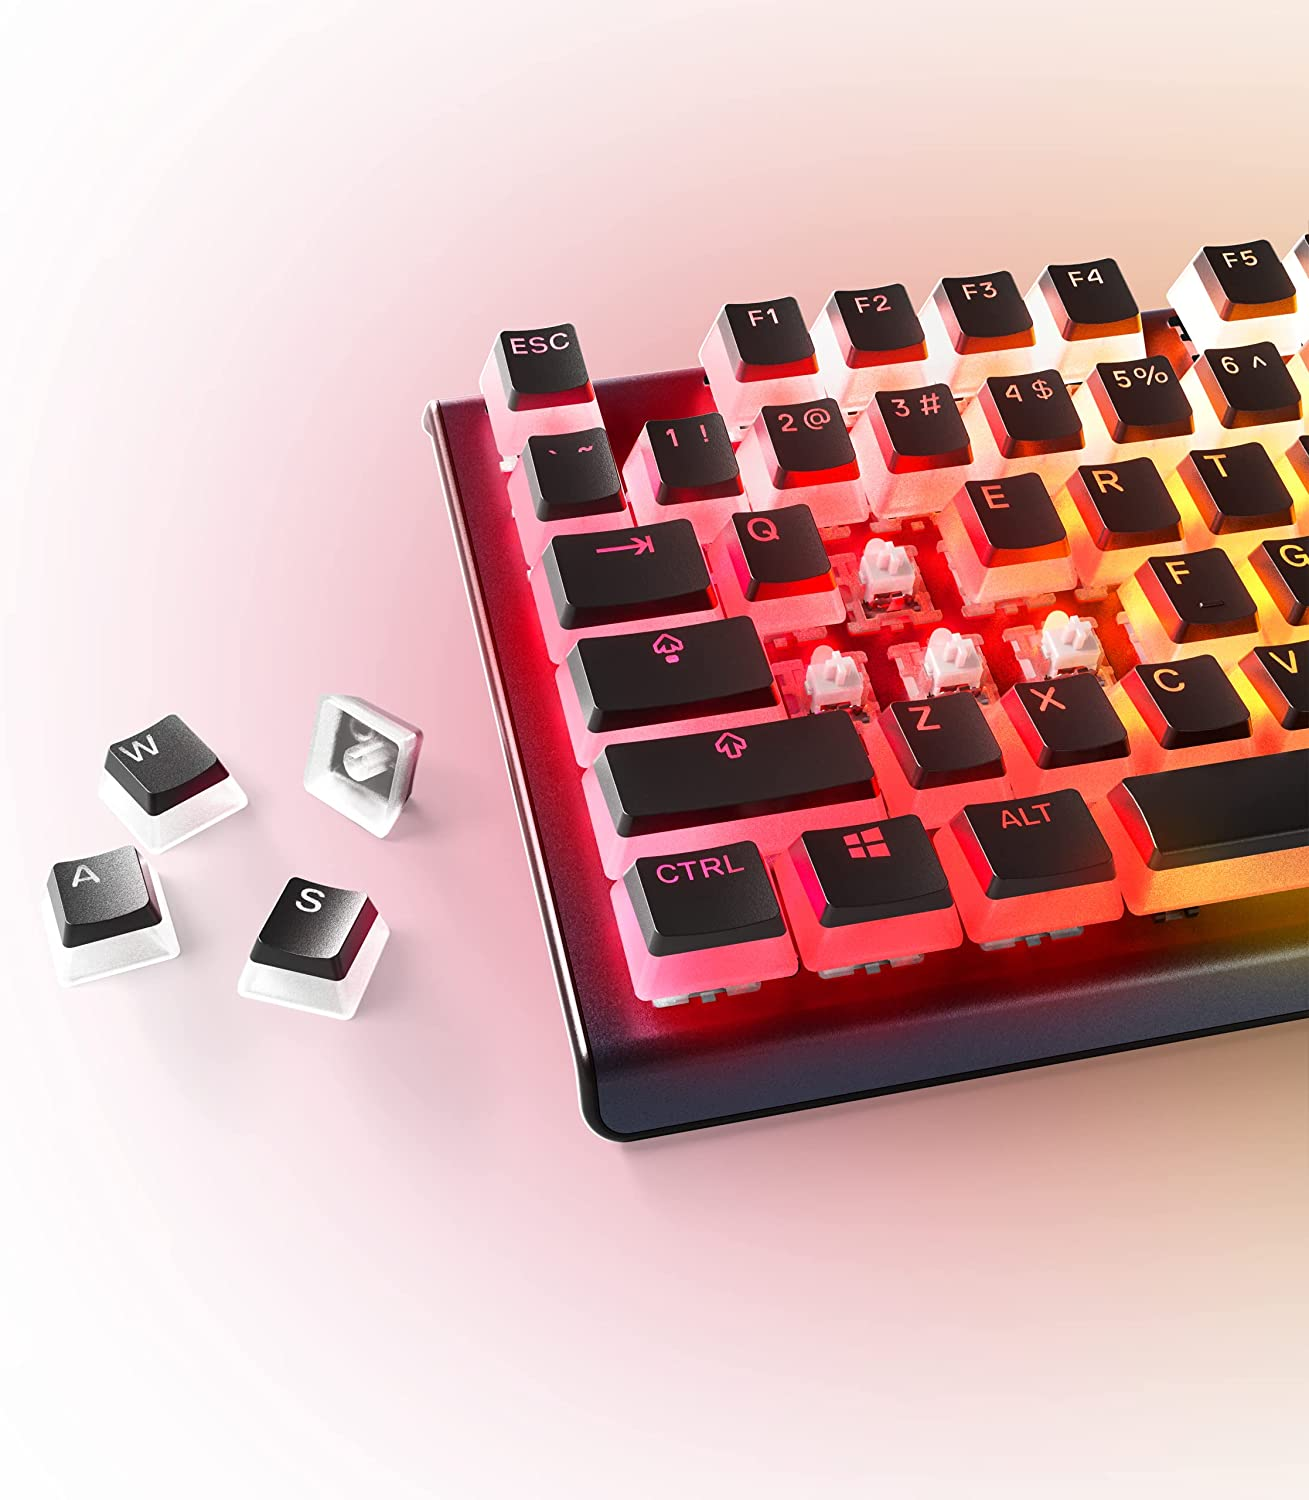 The keys and switches of hot-swappable keyboards can be changed.